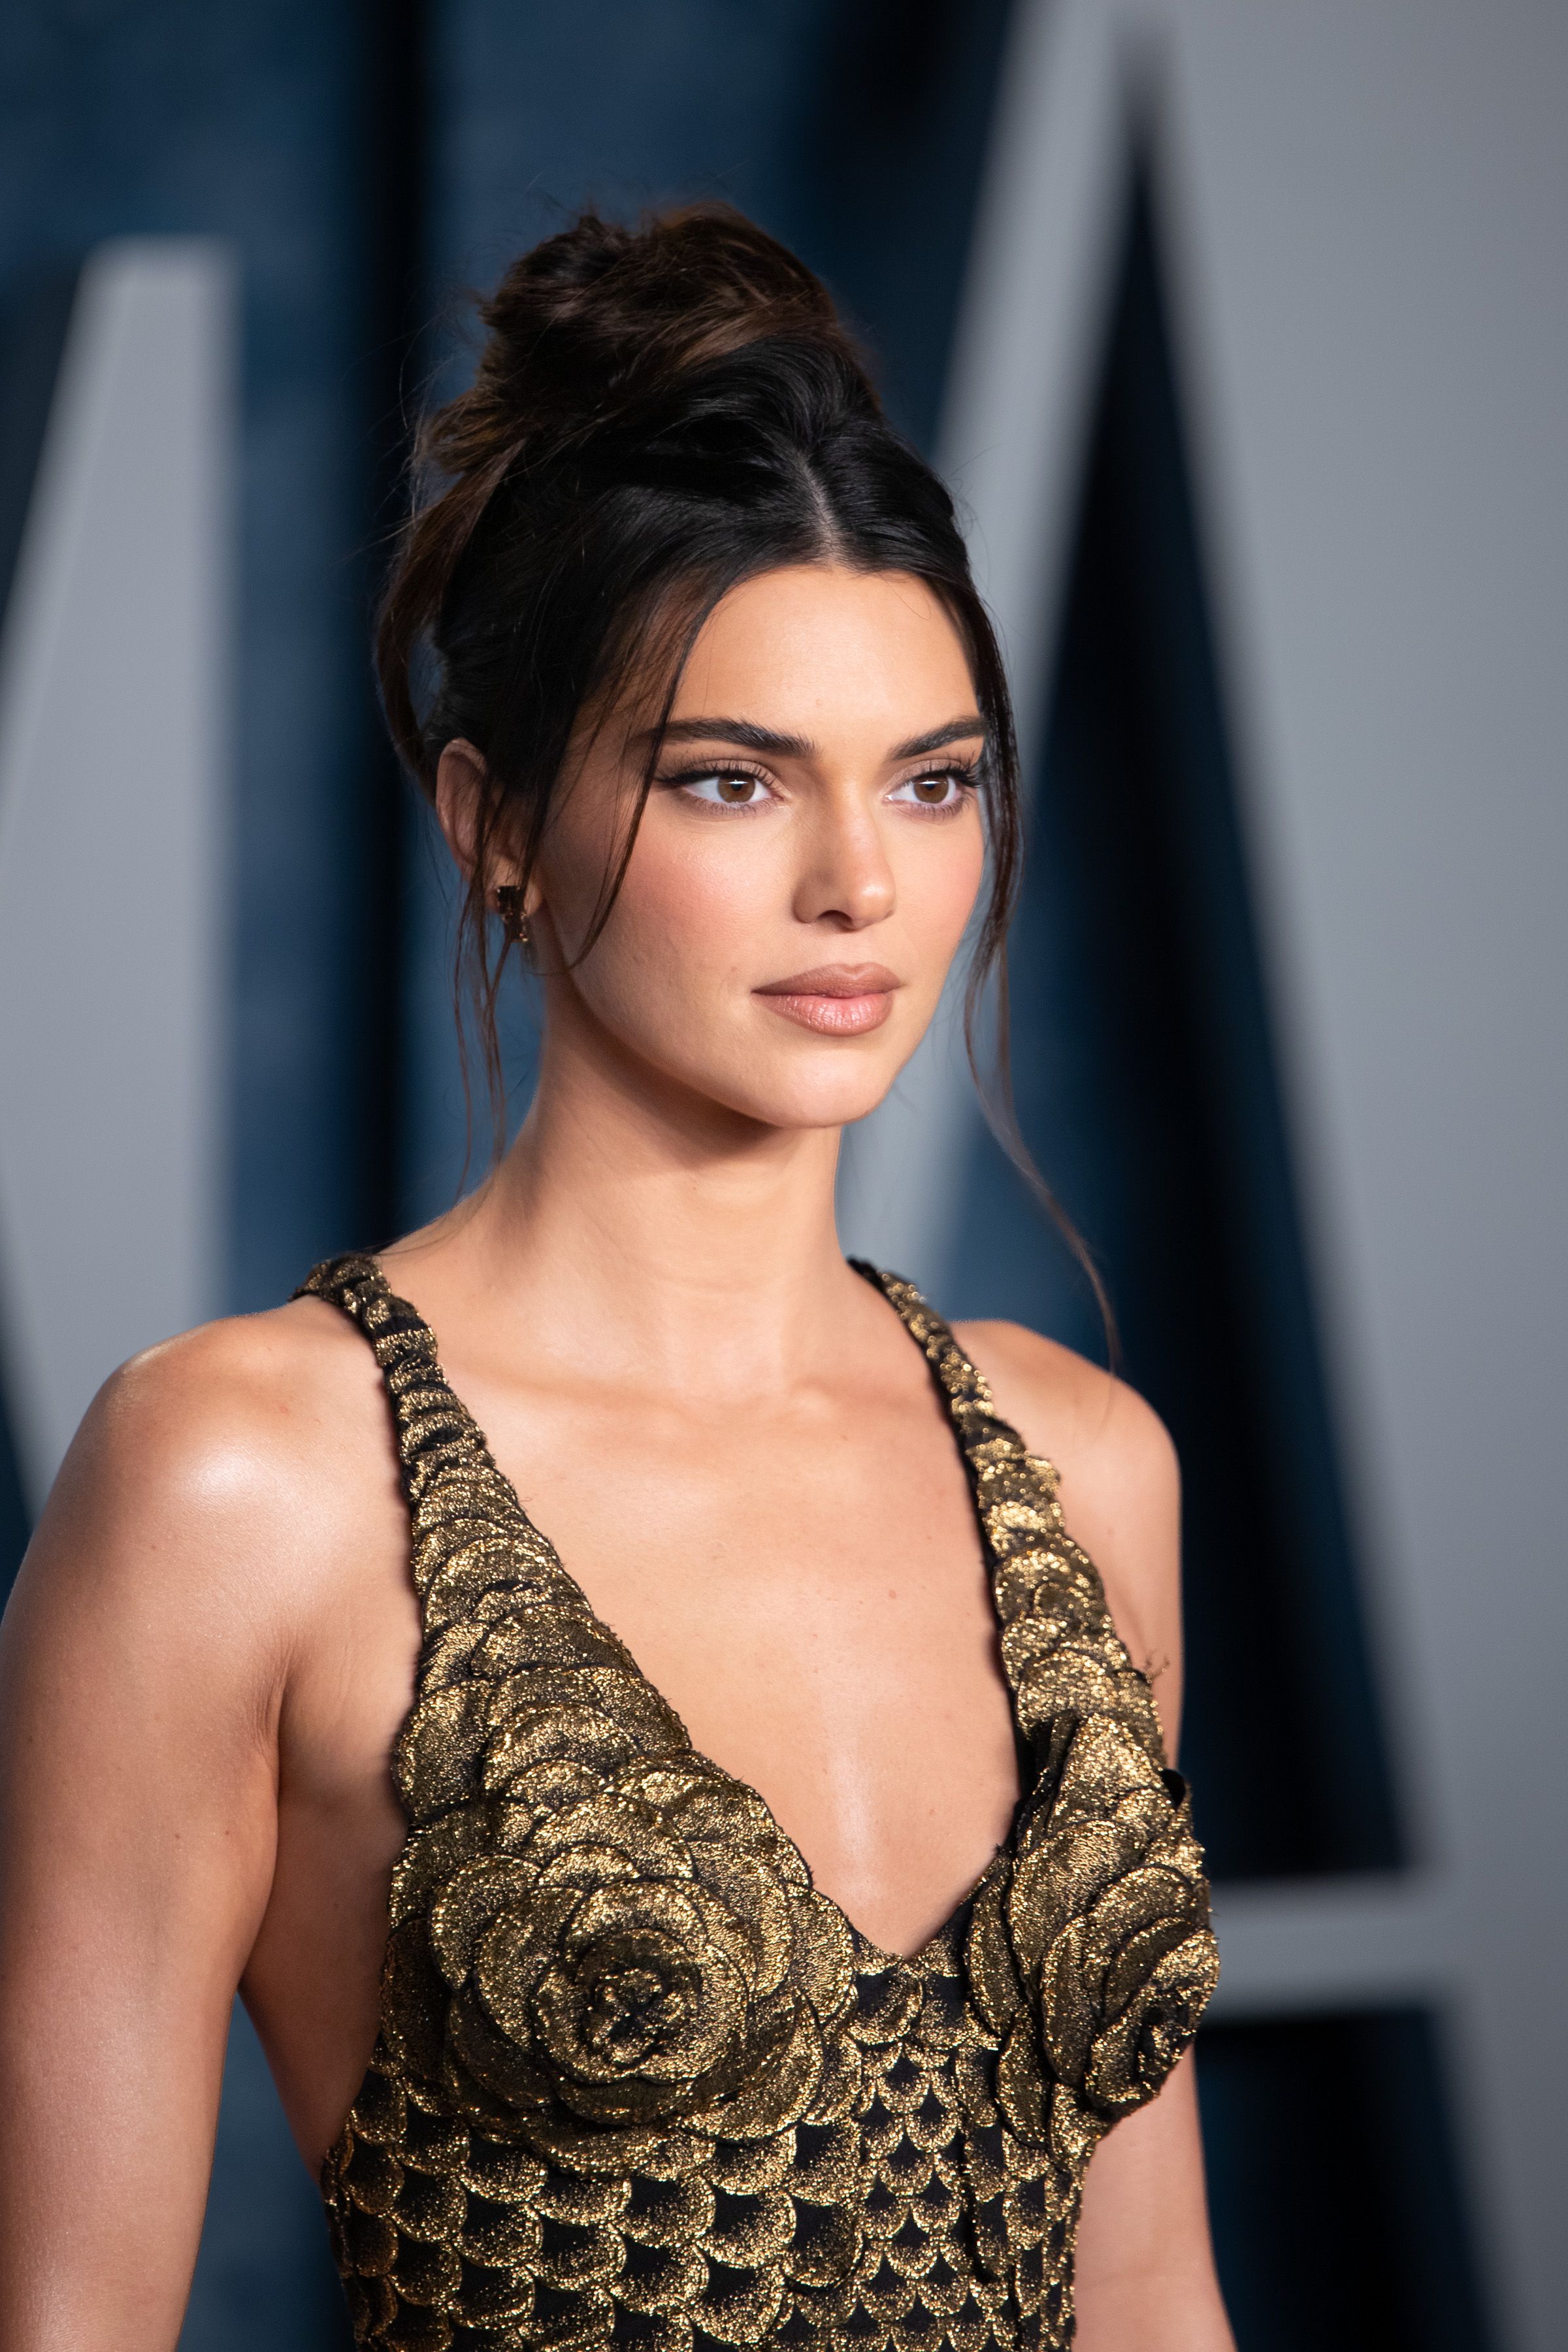 Kendall Jenner Elegant Updo Hairstyle - TheHairStyler.com